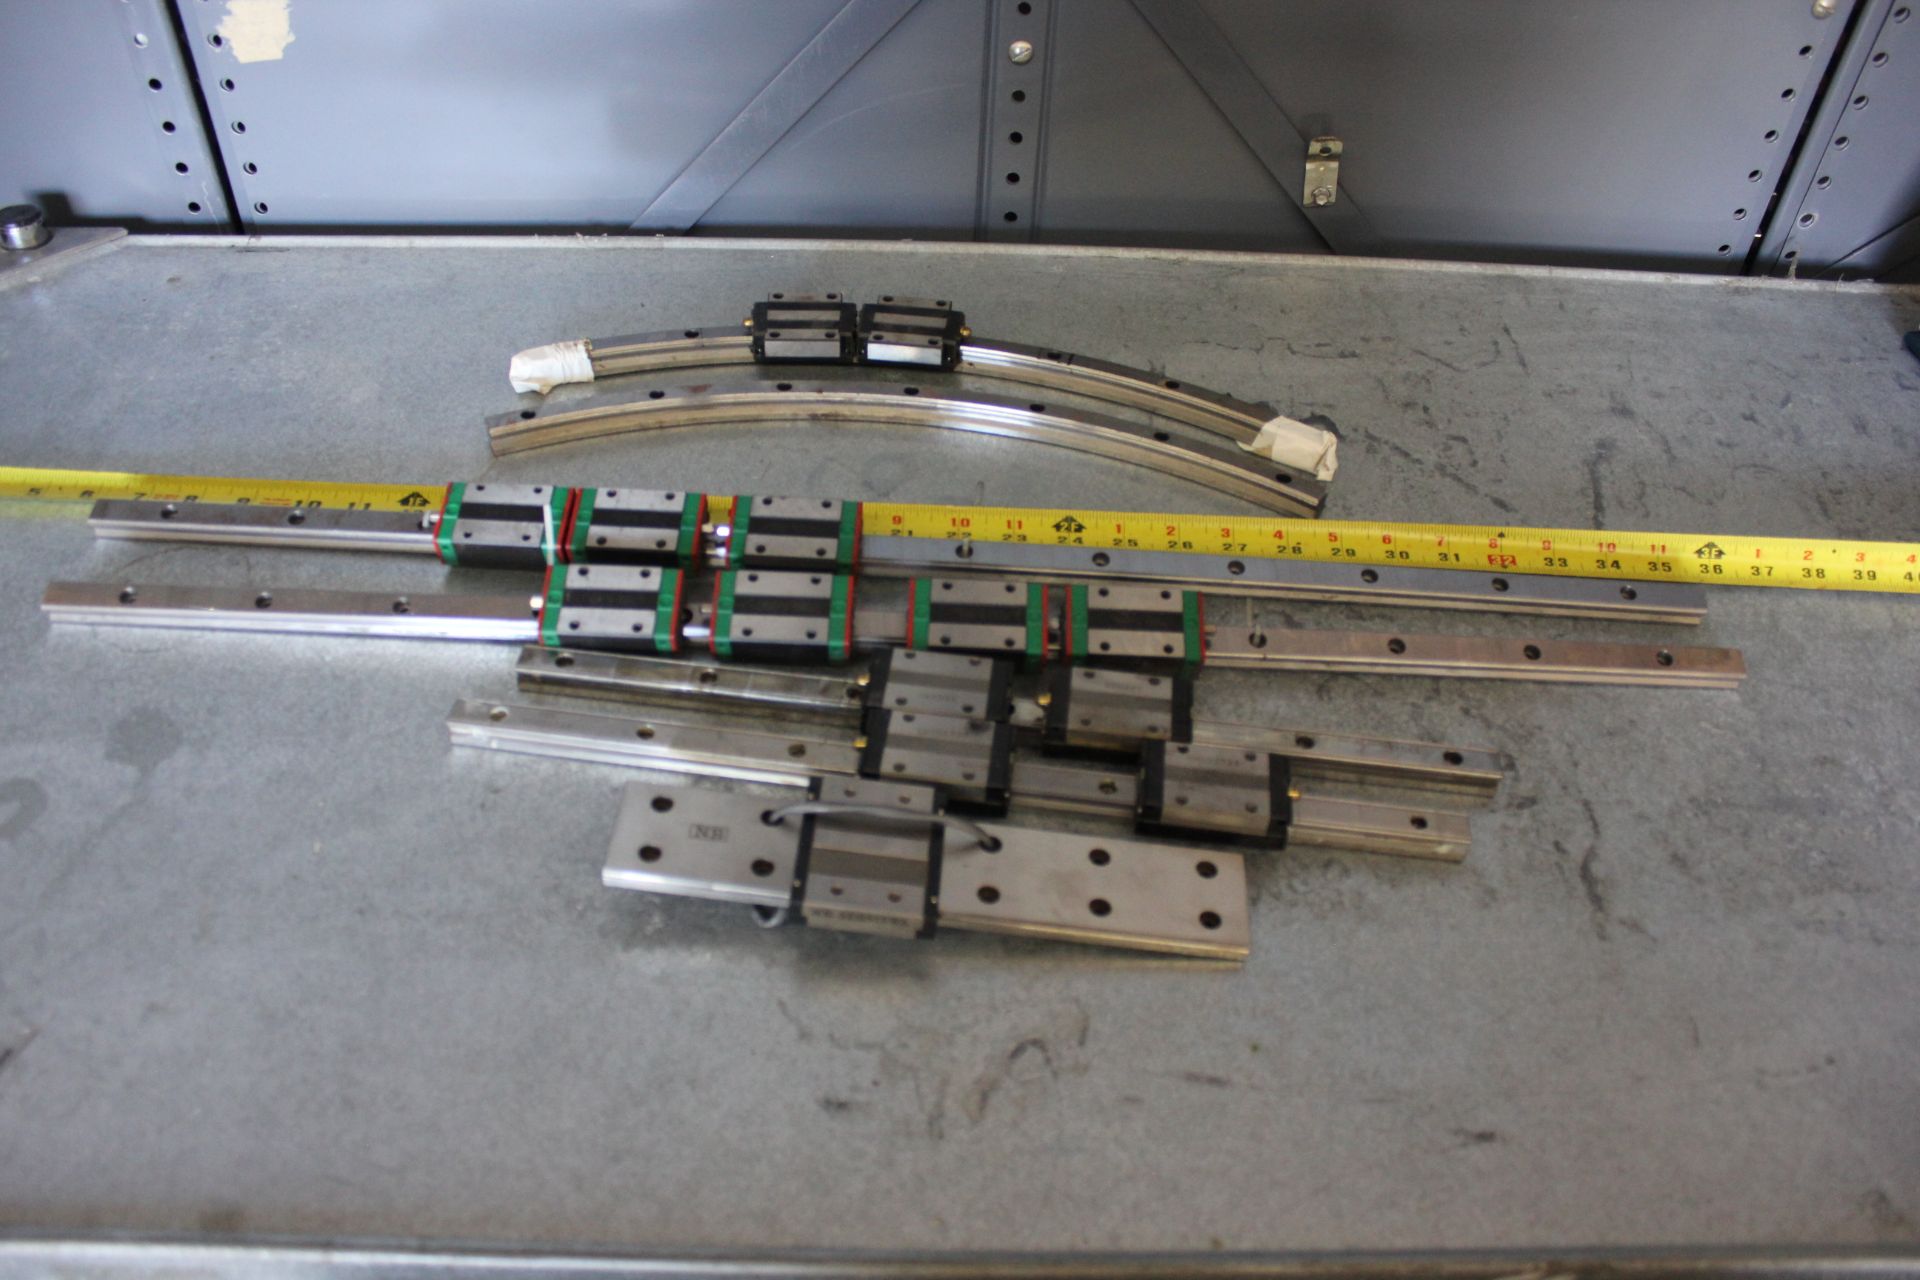 LOT OF LINEAR RAIL GUIDES WITH BEARING BLOCKS - HIWIN, THK,NB,ETC